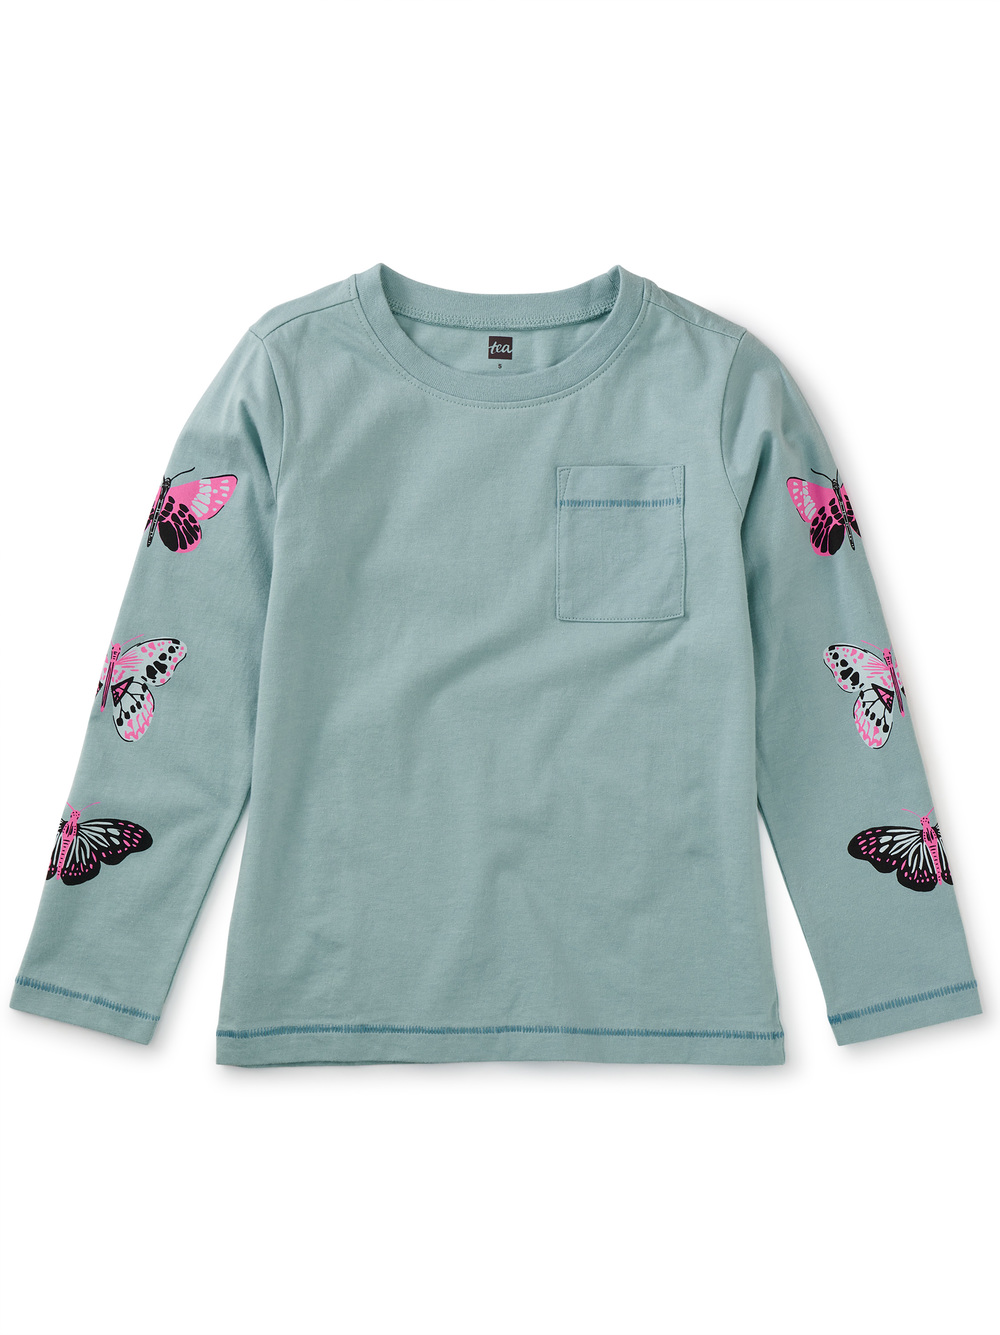 Butterfly Sleeve Graphic Tee